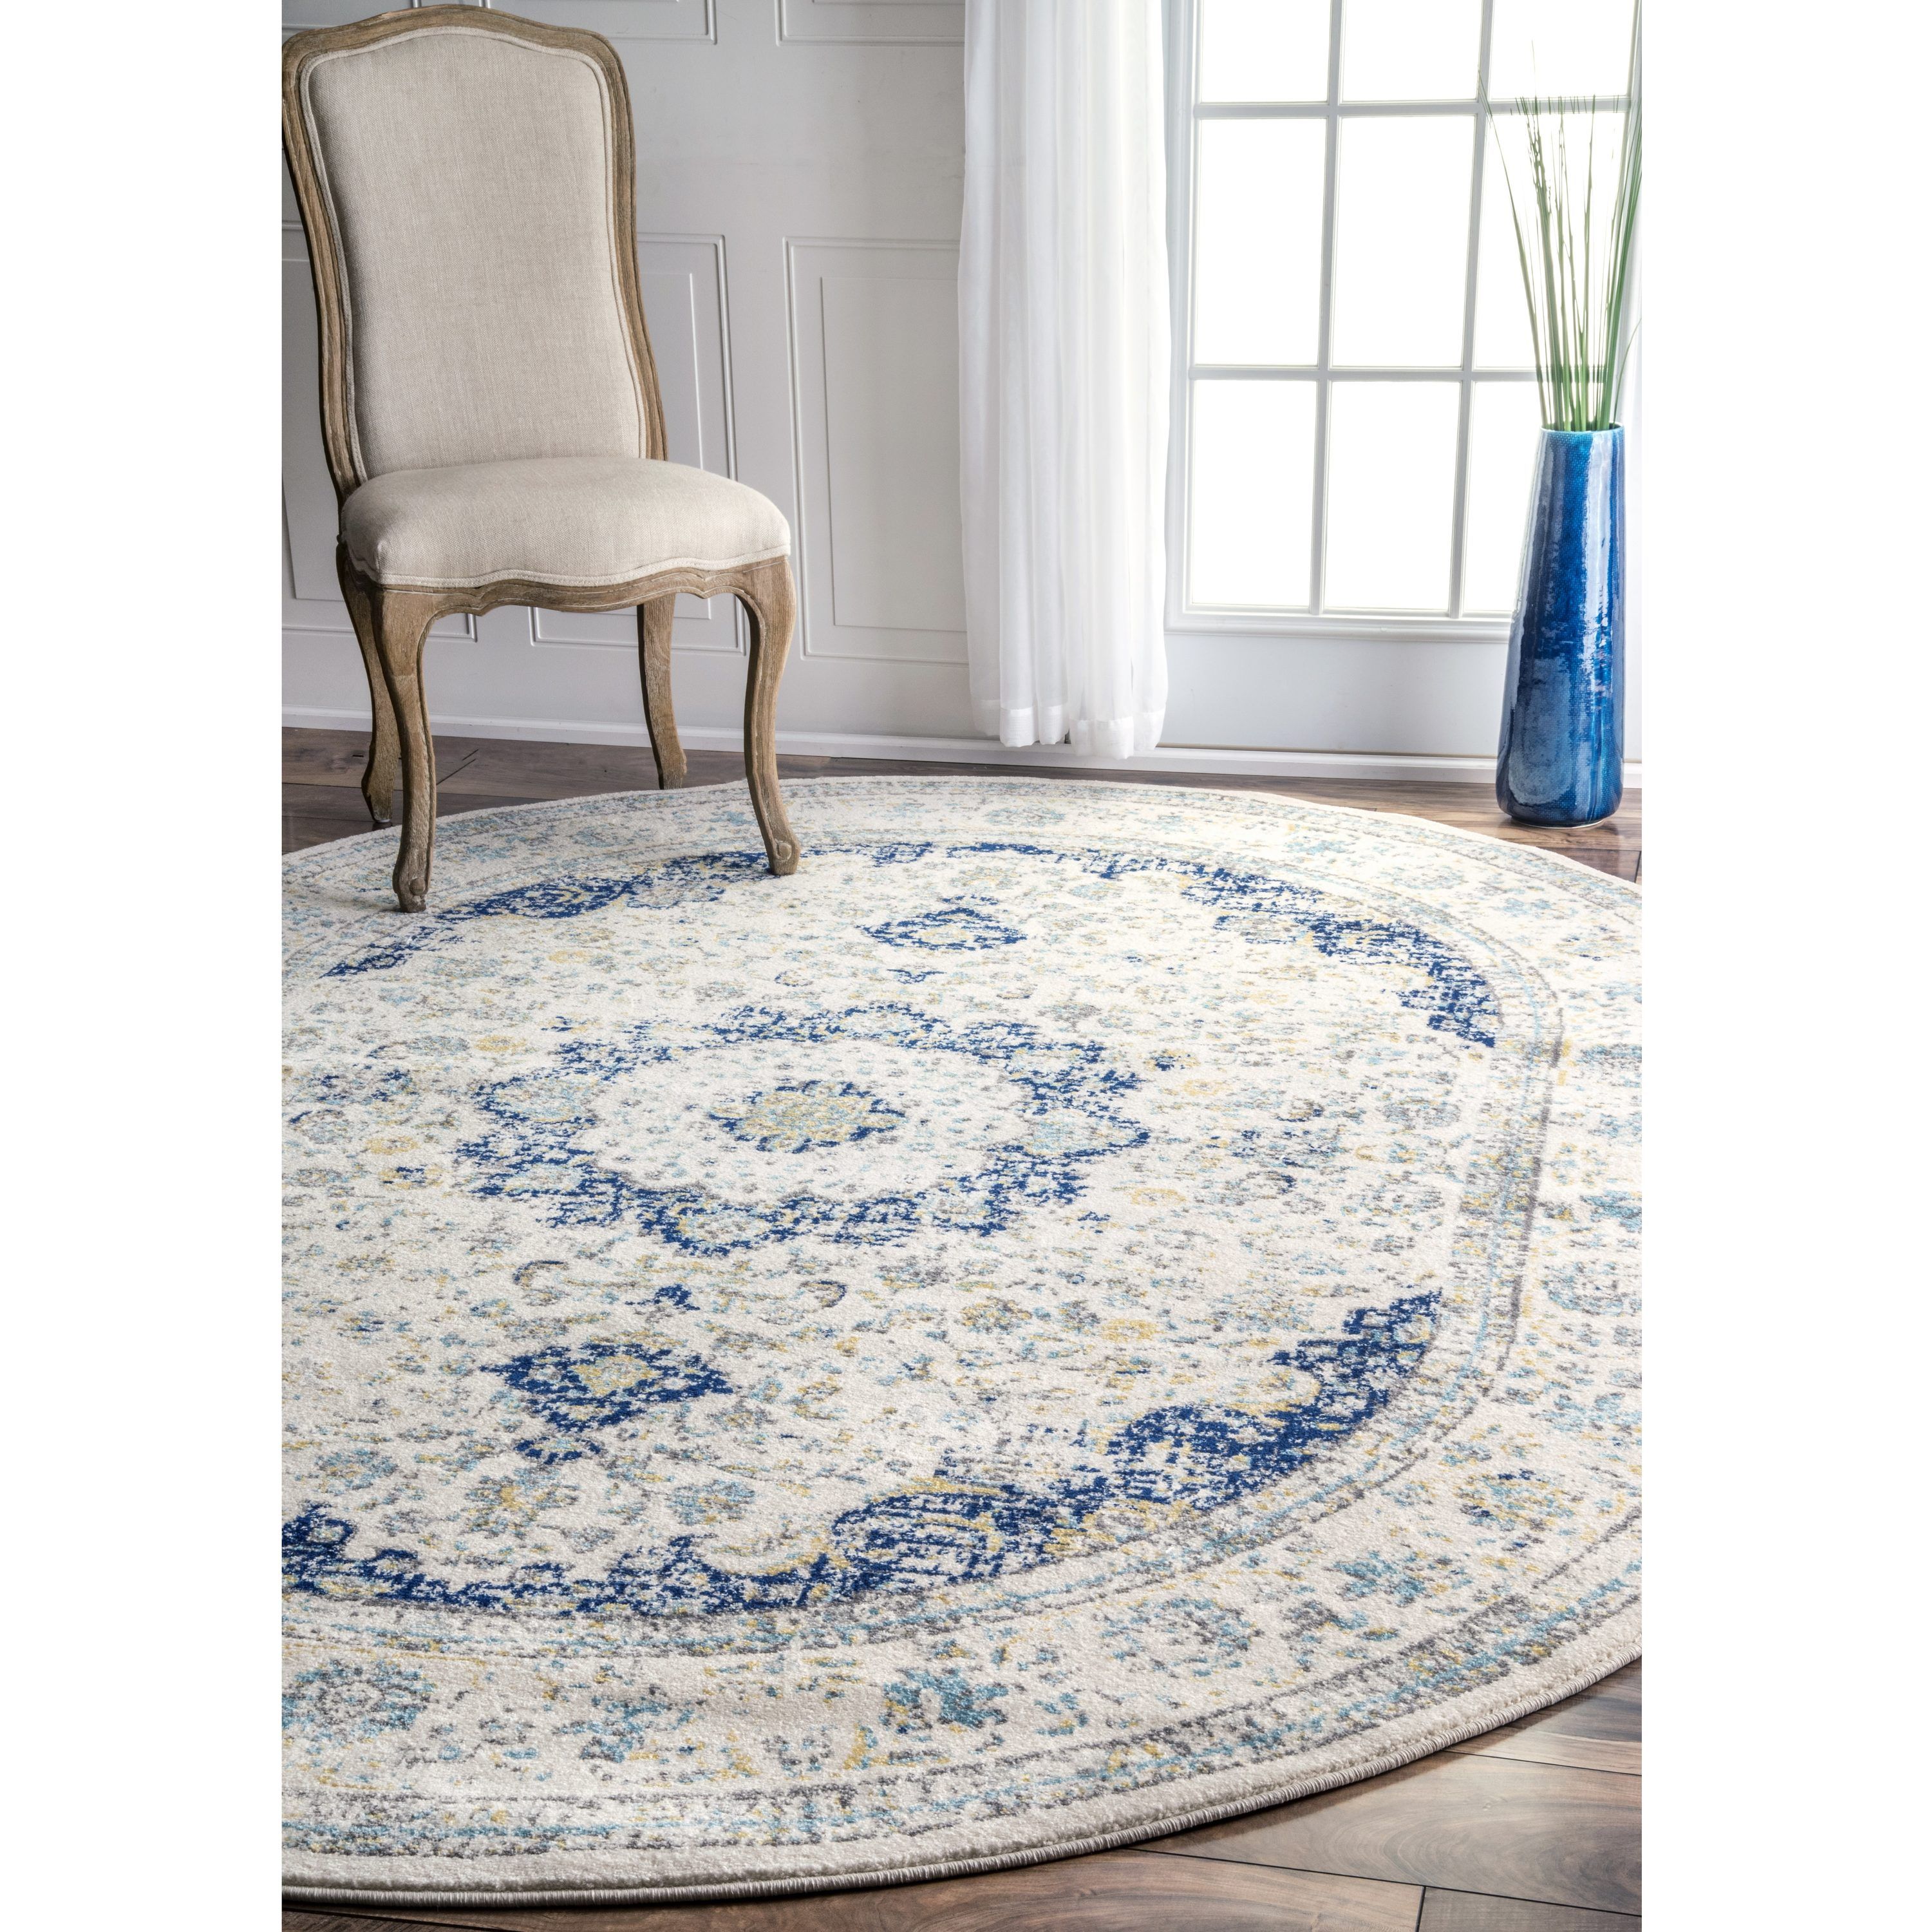 Nuloom 3 X 5 Blue Oval Indoor Distressed/Overdyed Area Rug In The Rugs  Department At Lowes Inside Blue Oval Rugs (View 5 of 15)